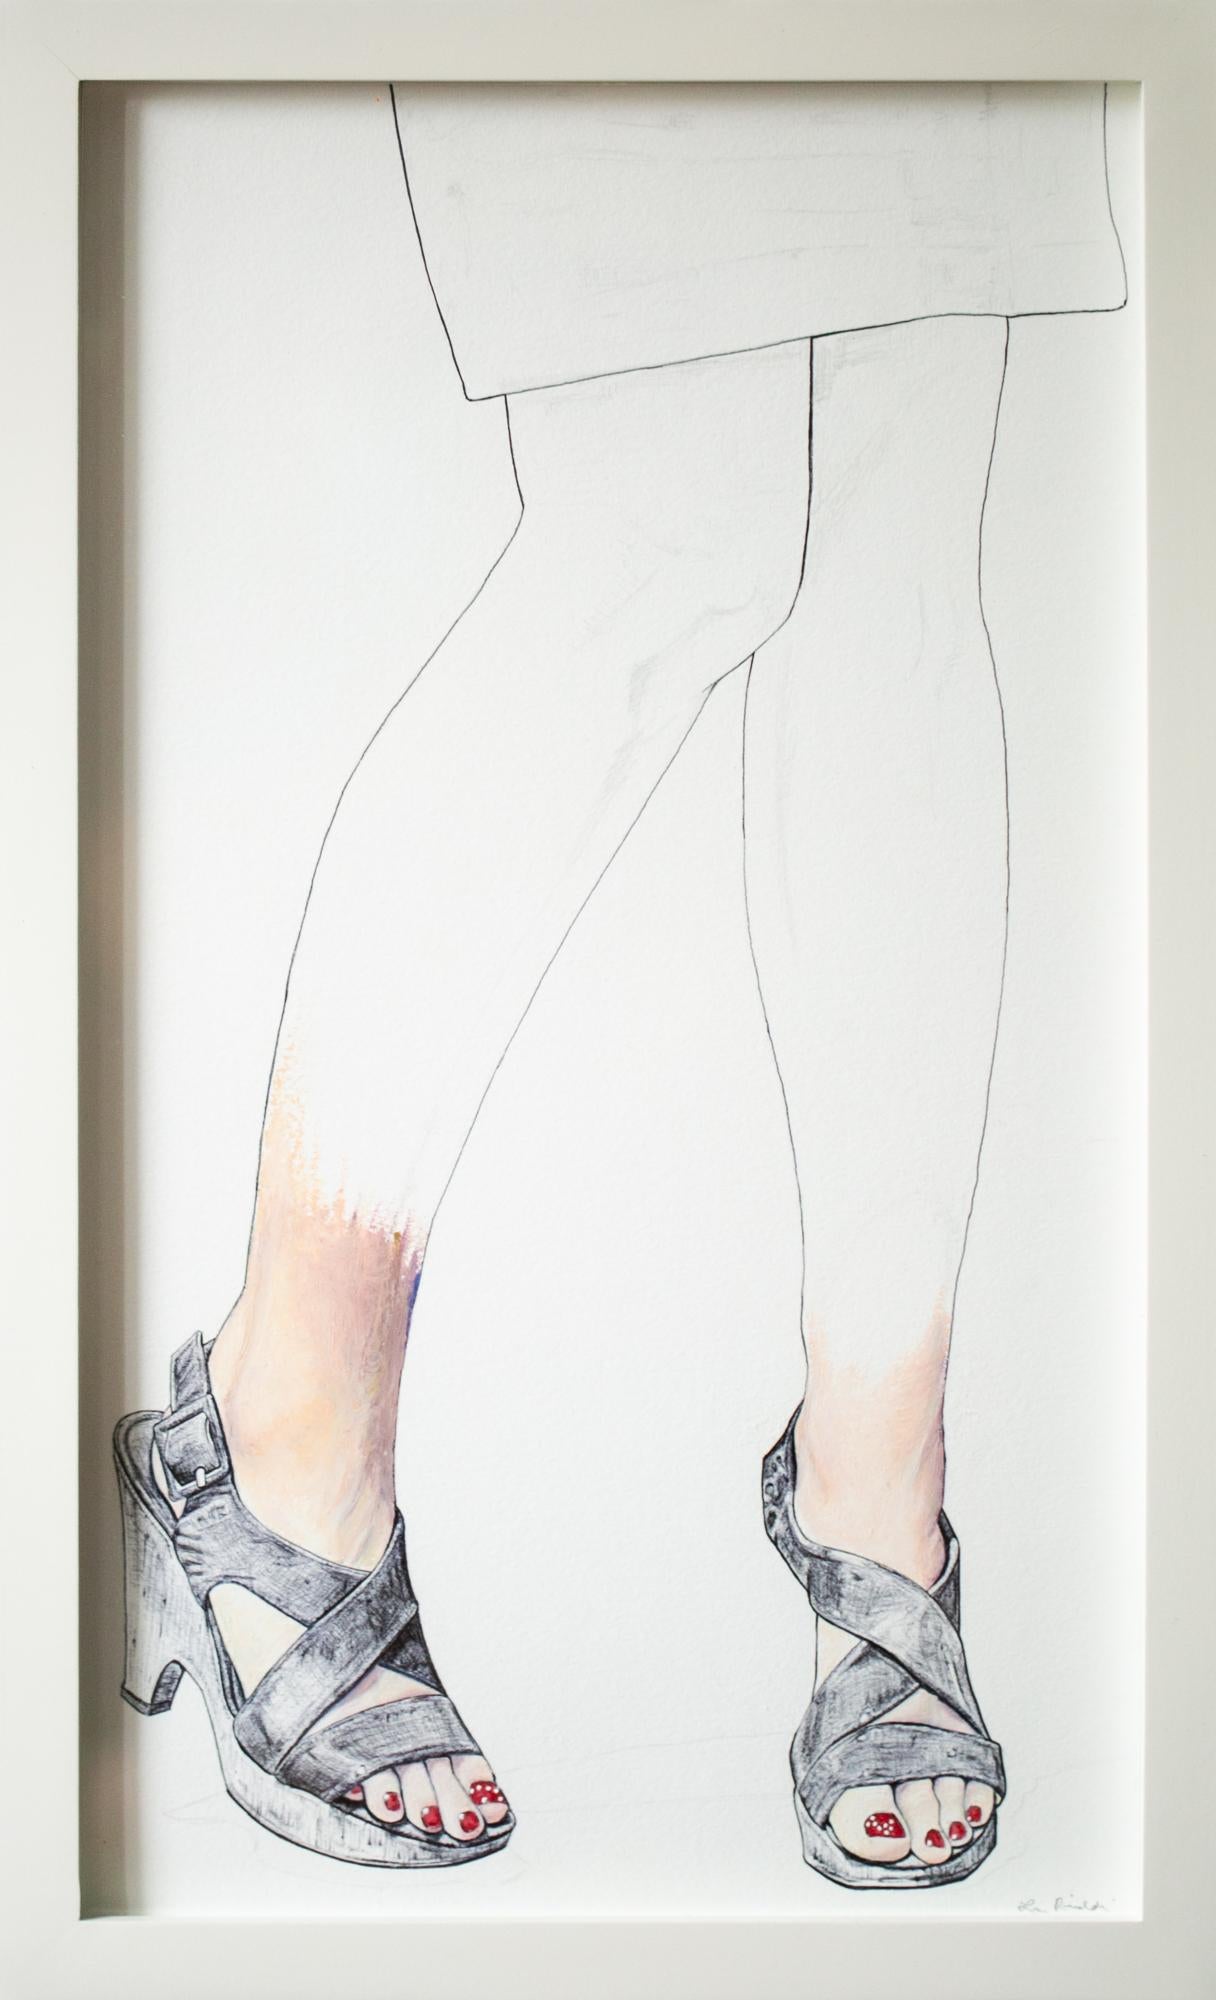 "Polished", Figurative Oil Pastel and Pen Drawing, Portrait of Legs